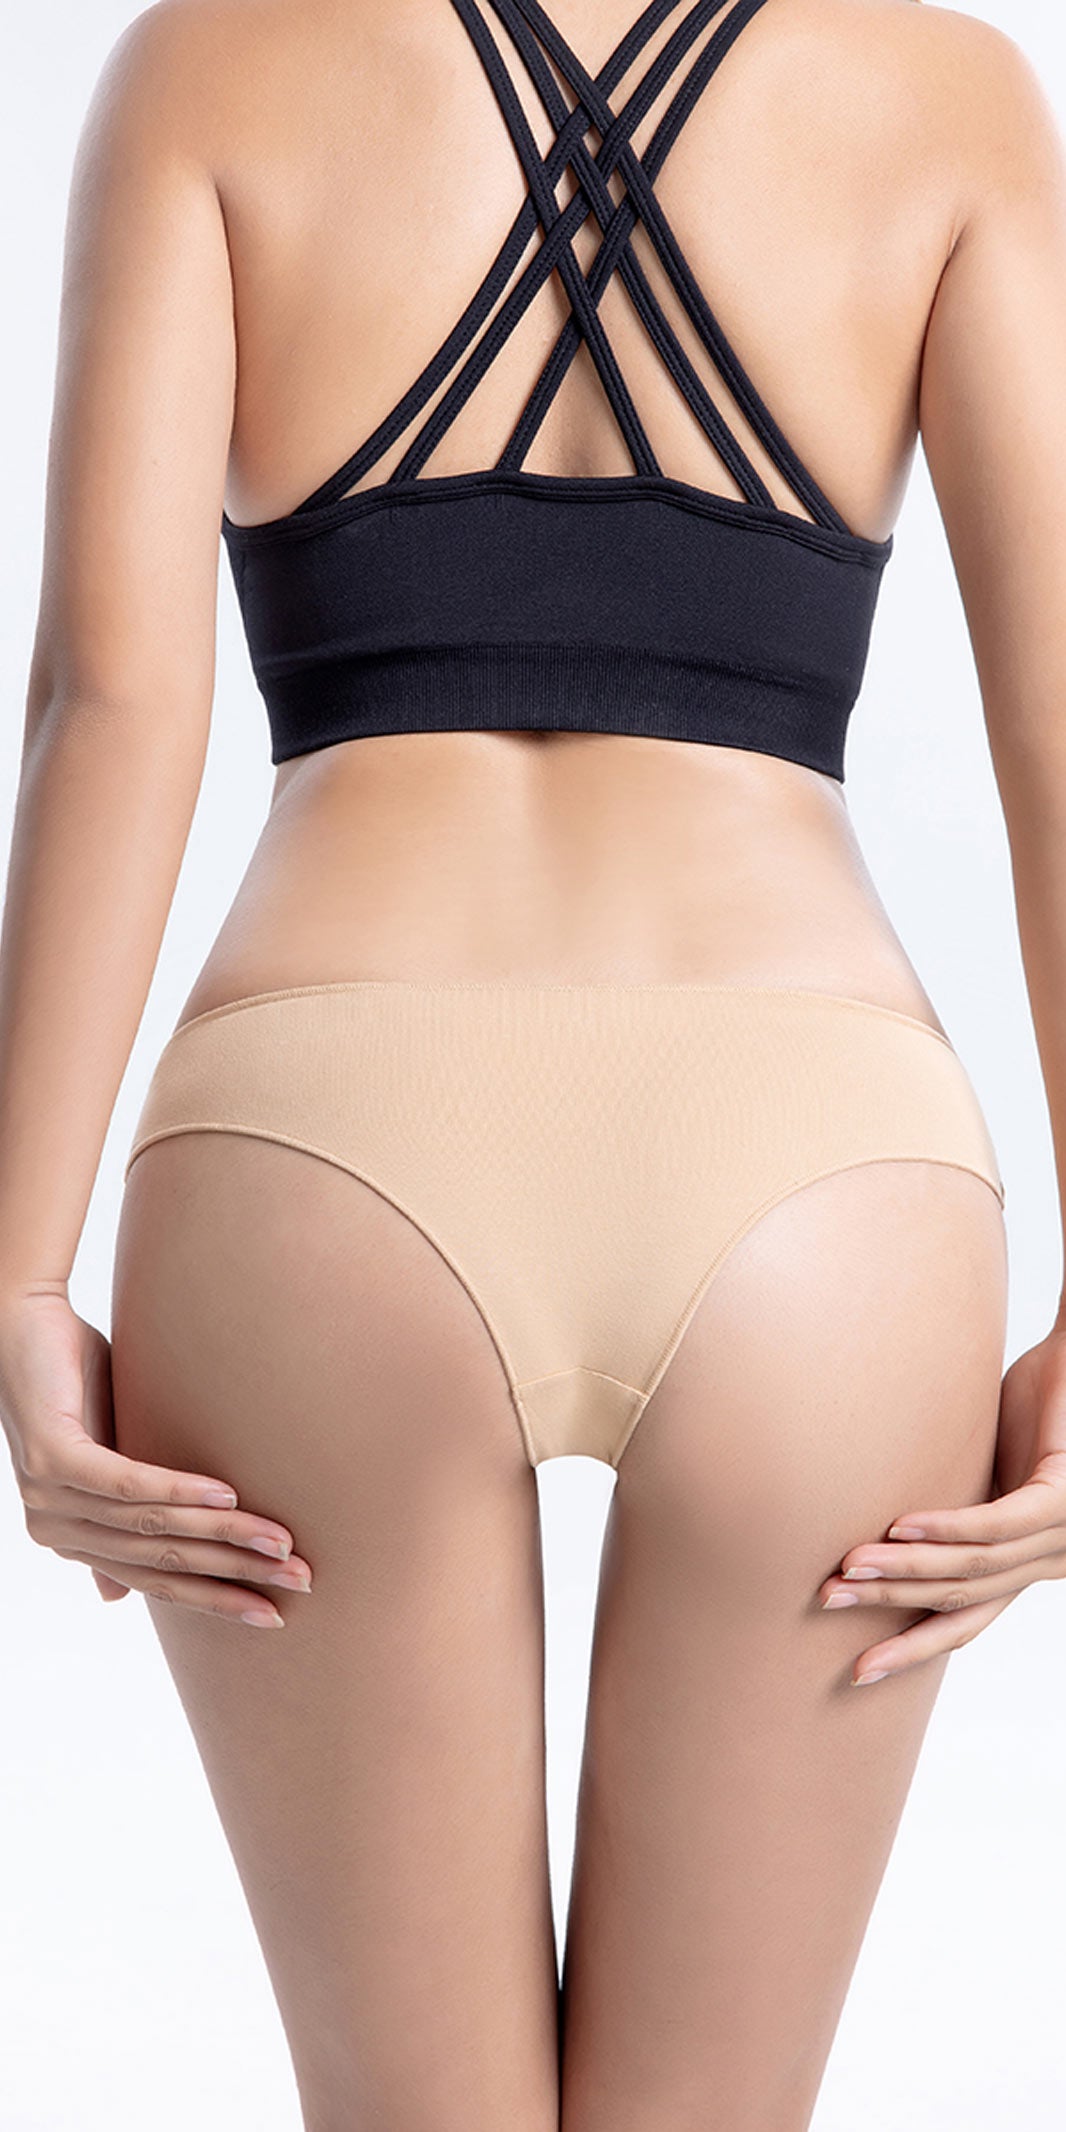 High-quality breathable cotton underwear